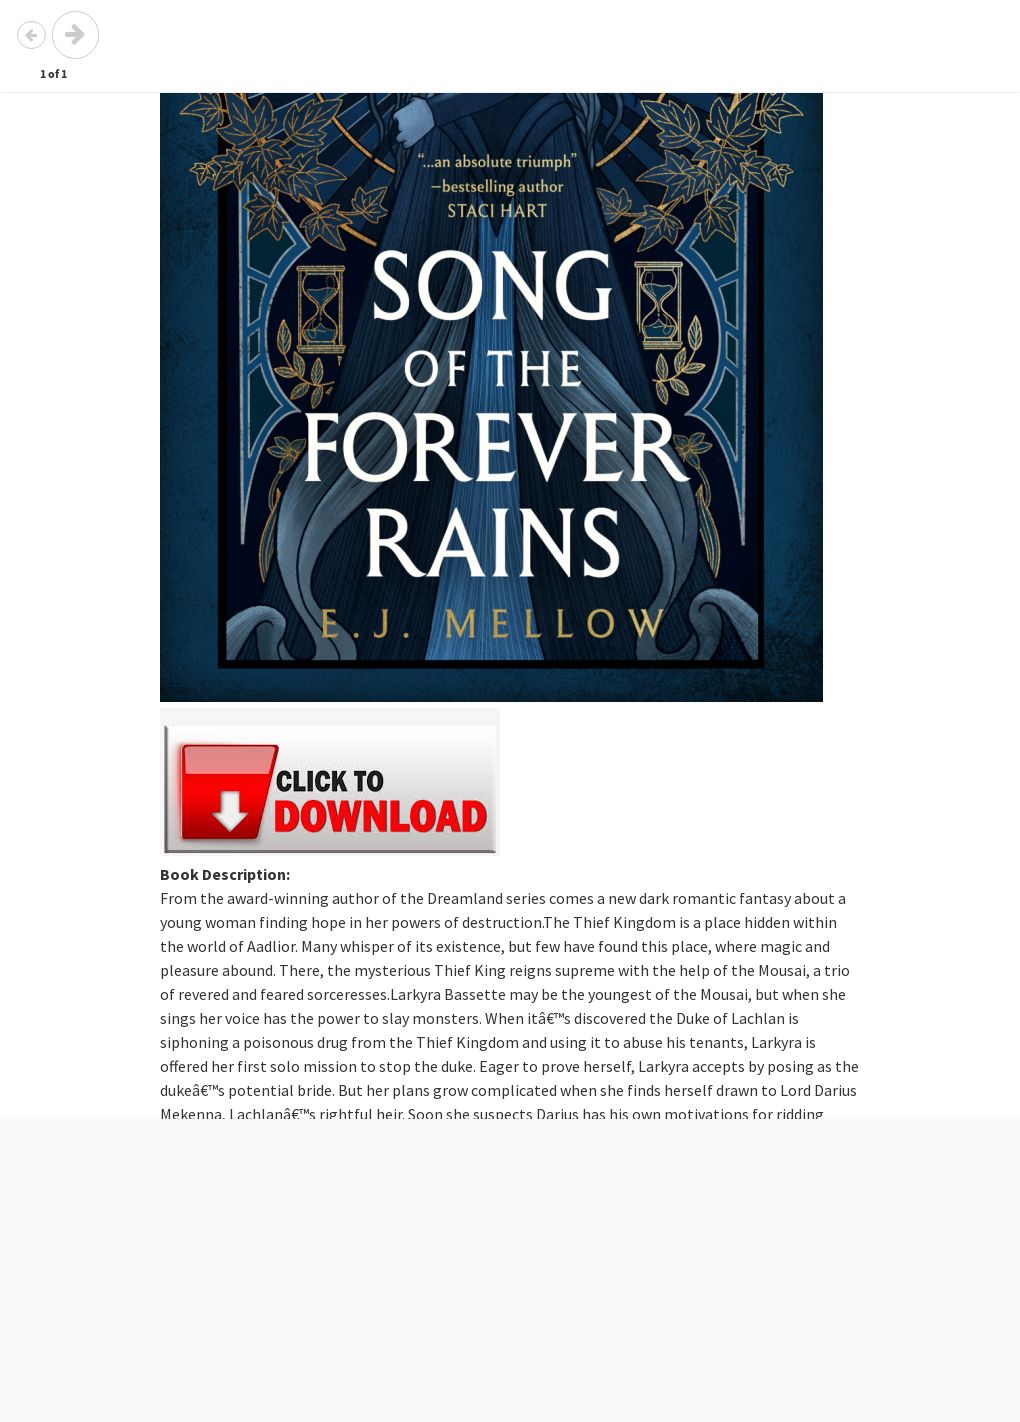 song of forever rains